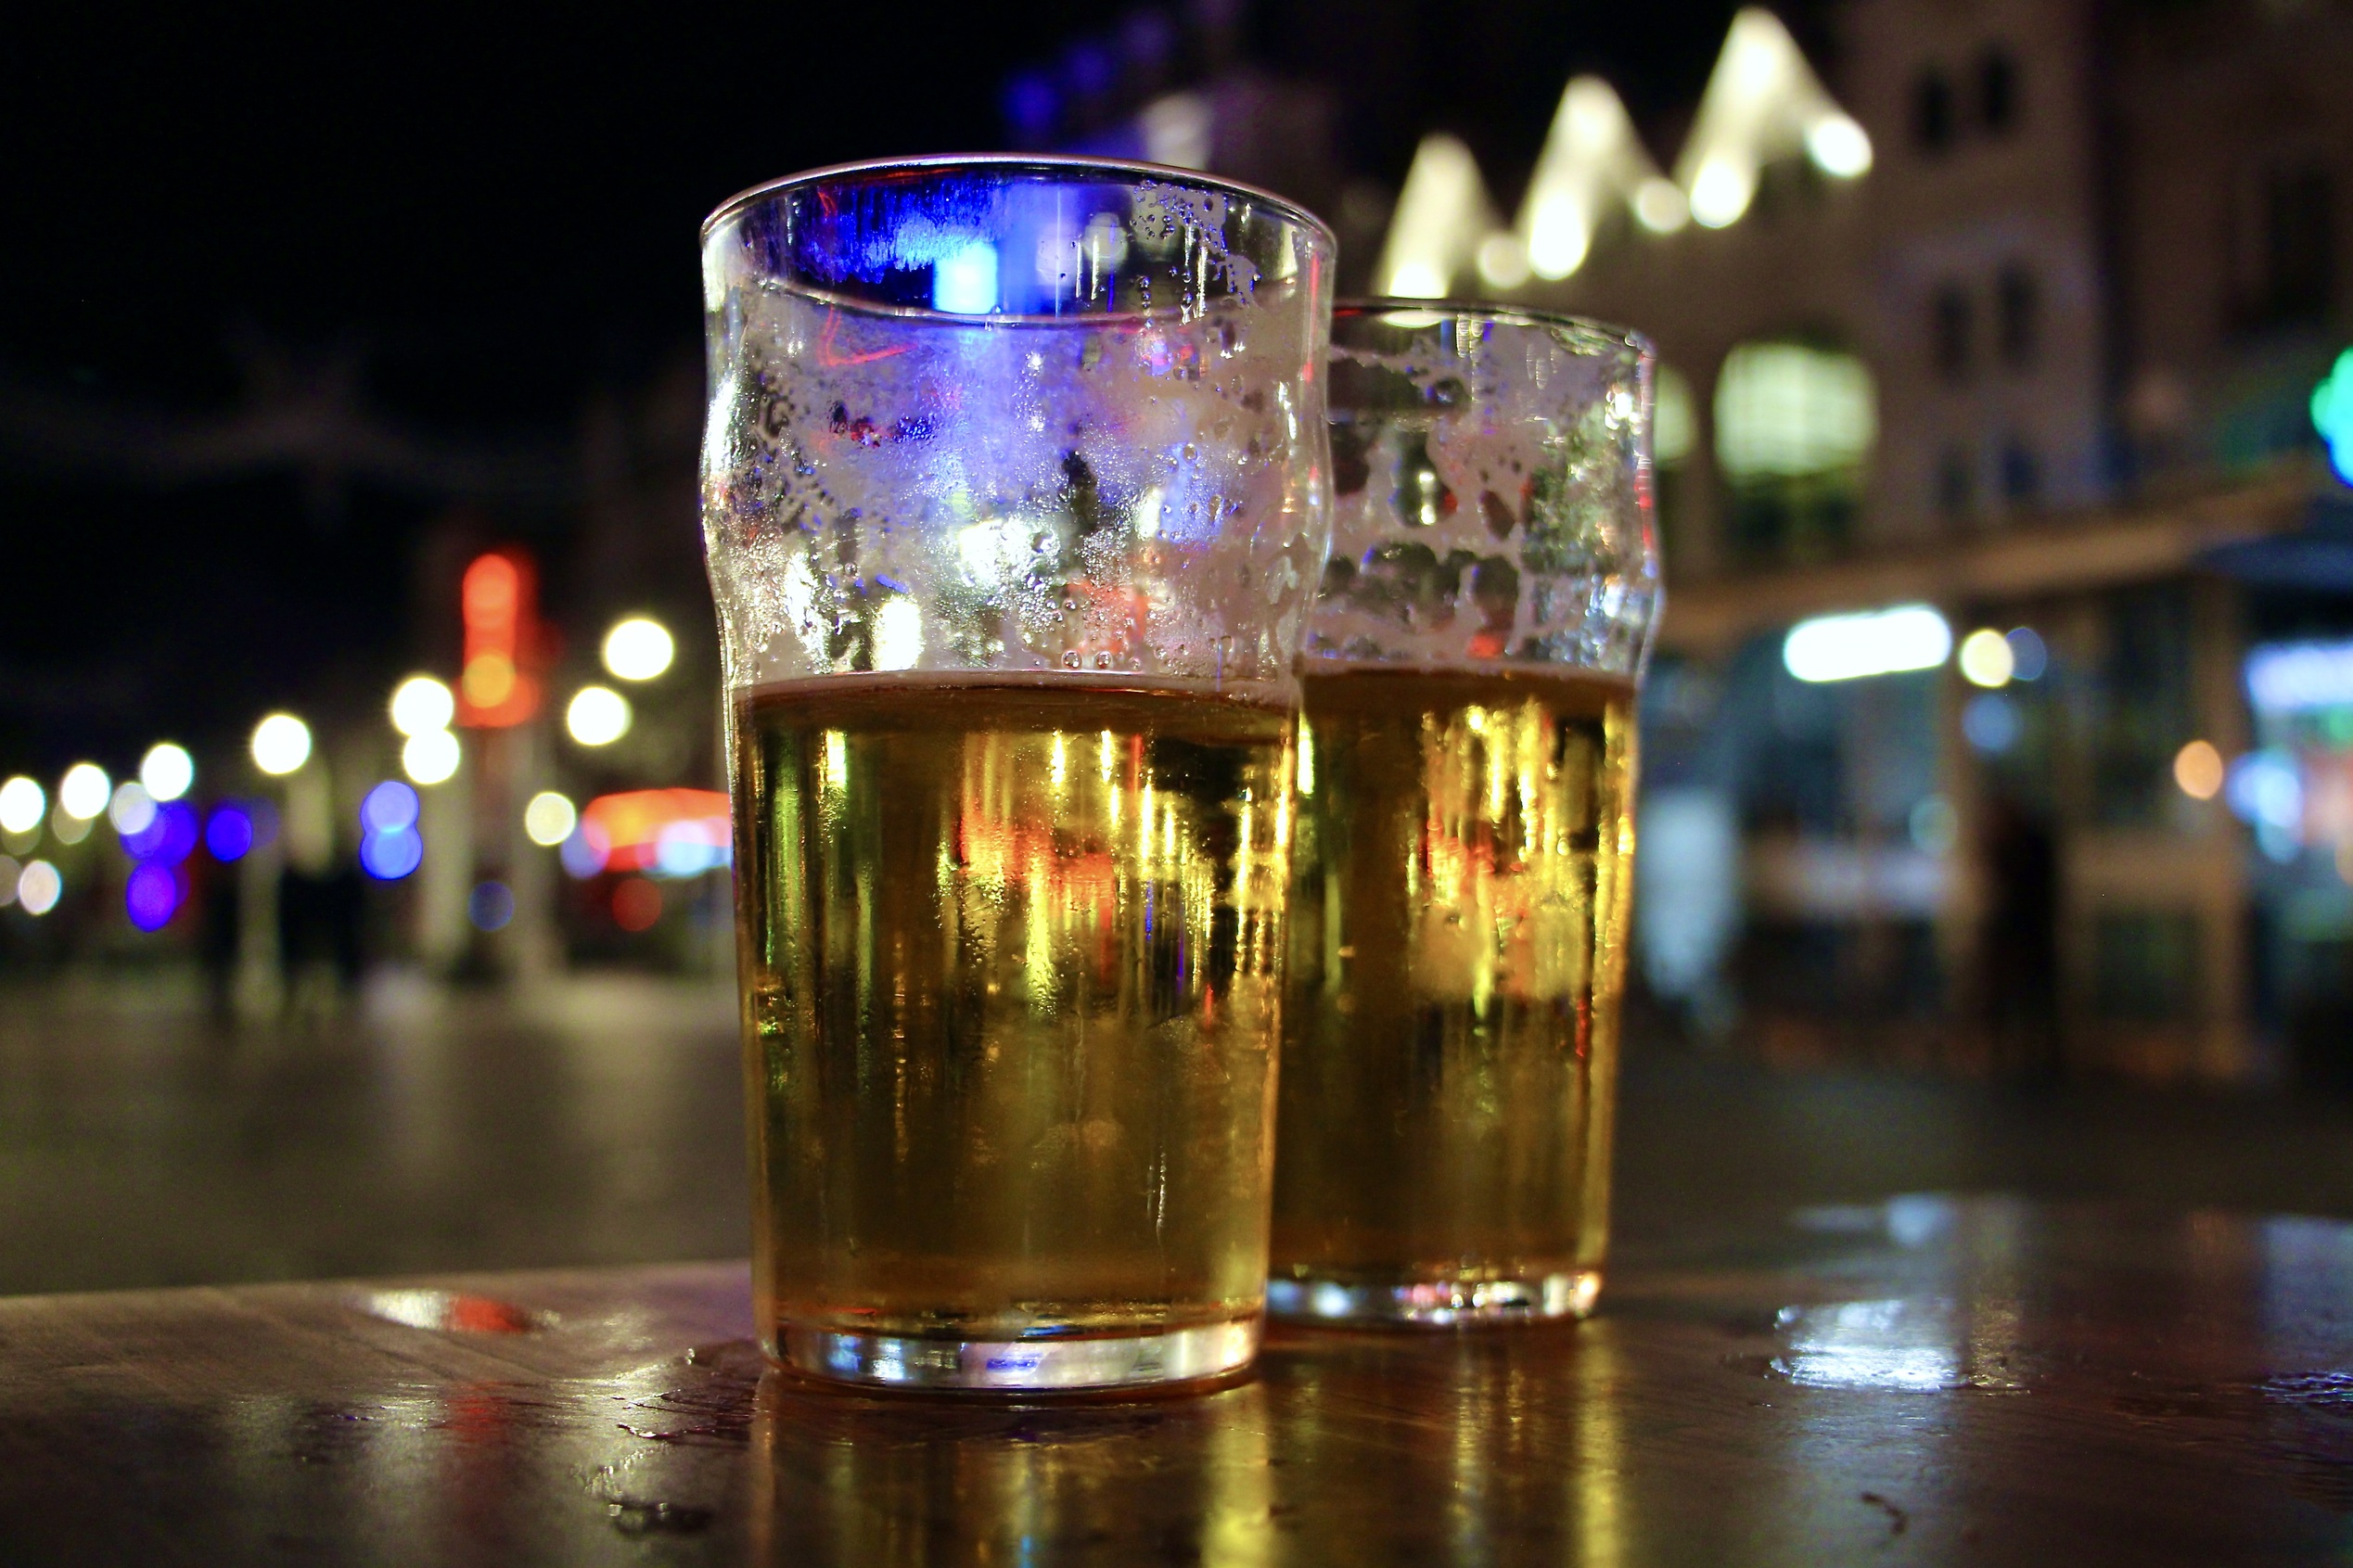 Two pints of beer on a table outside illuminated by city lights in the evening.